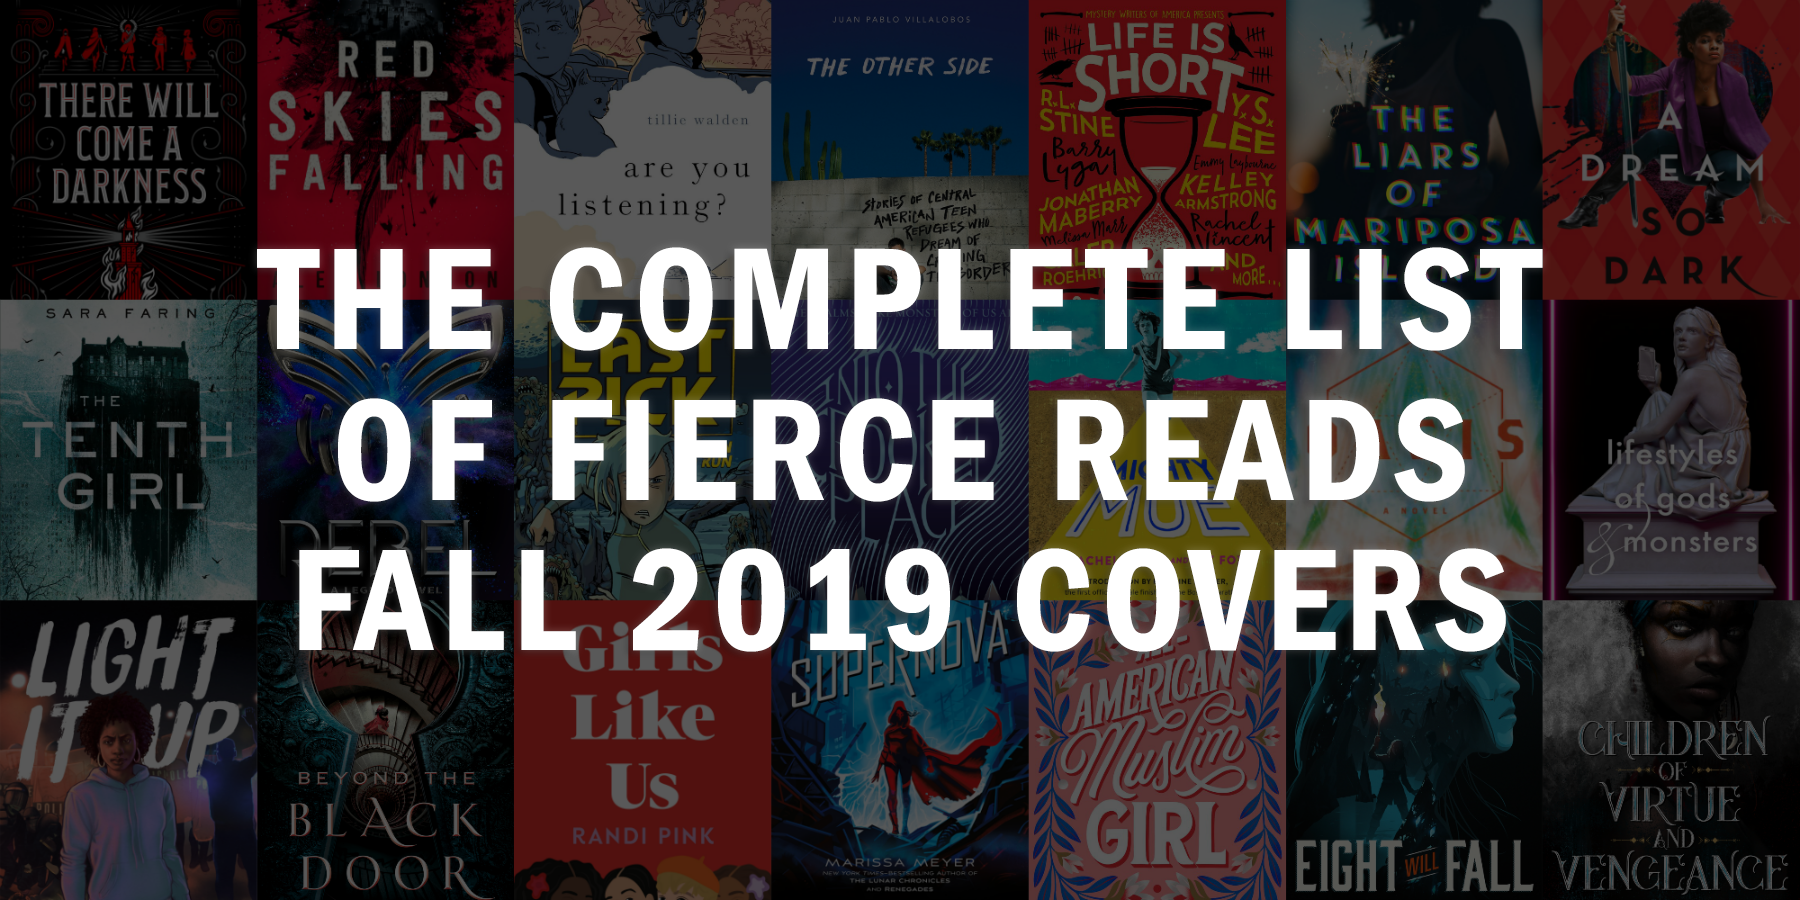 The Complete List of Fierce Reads Fall 2019 Covers